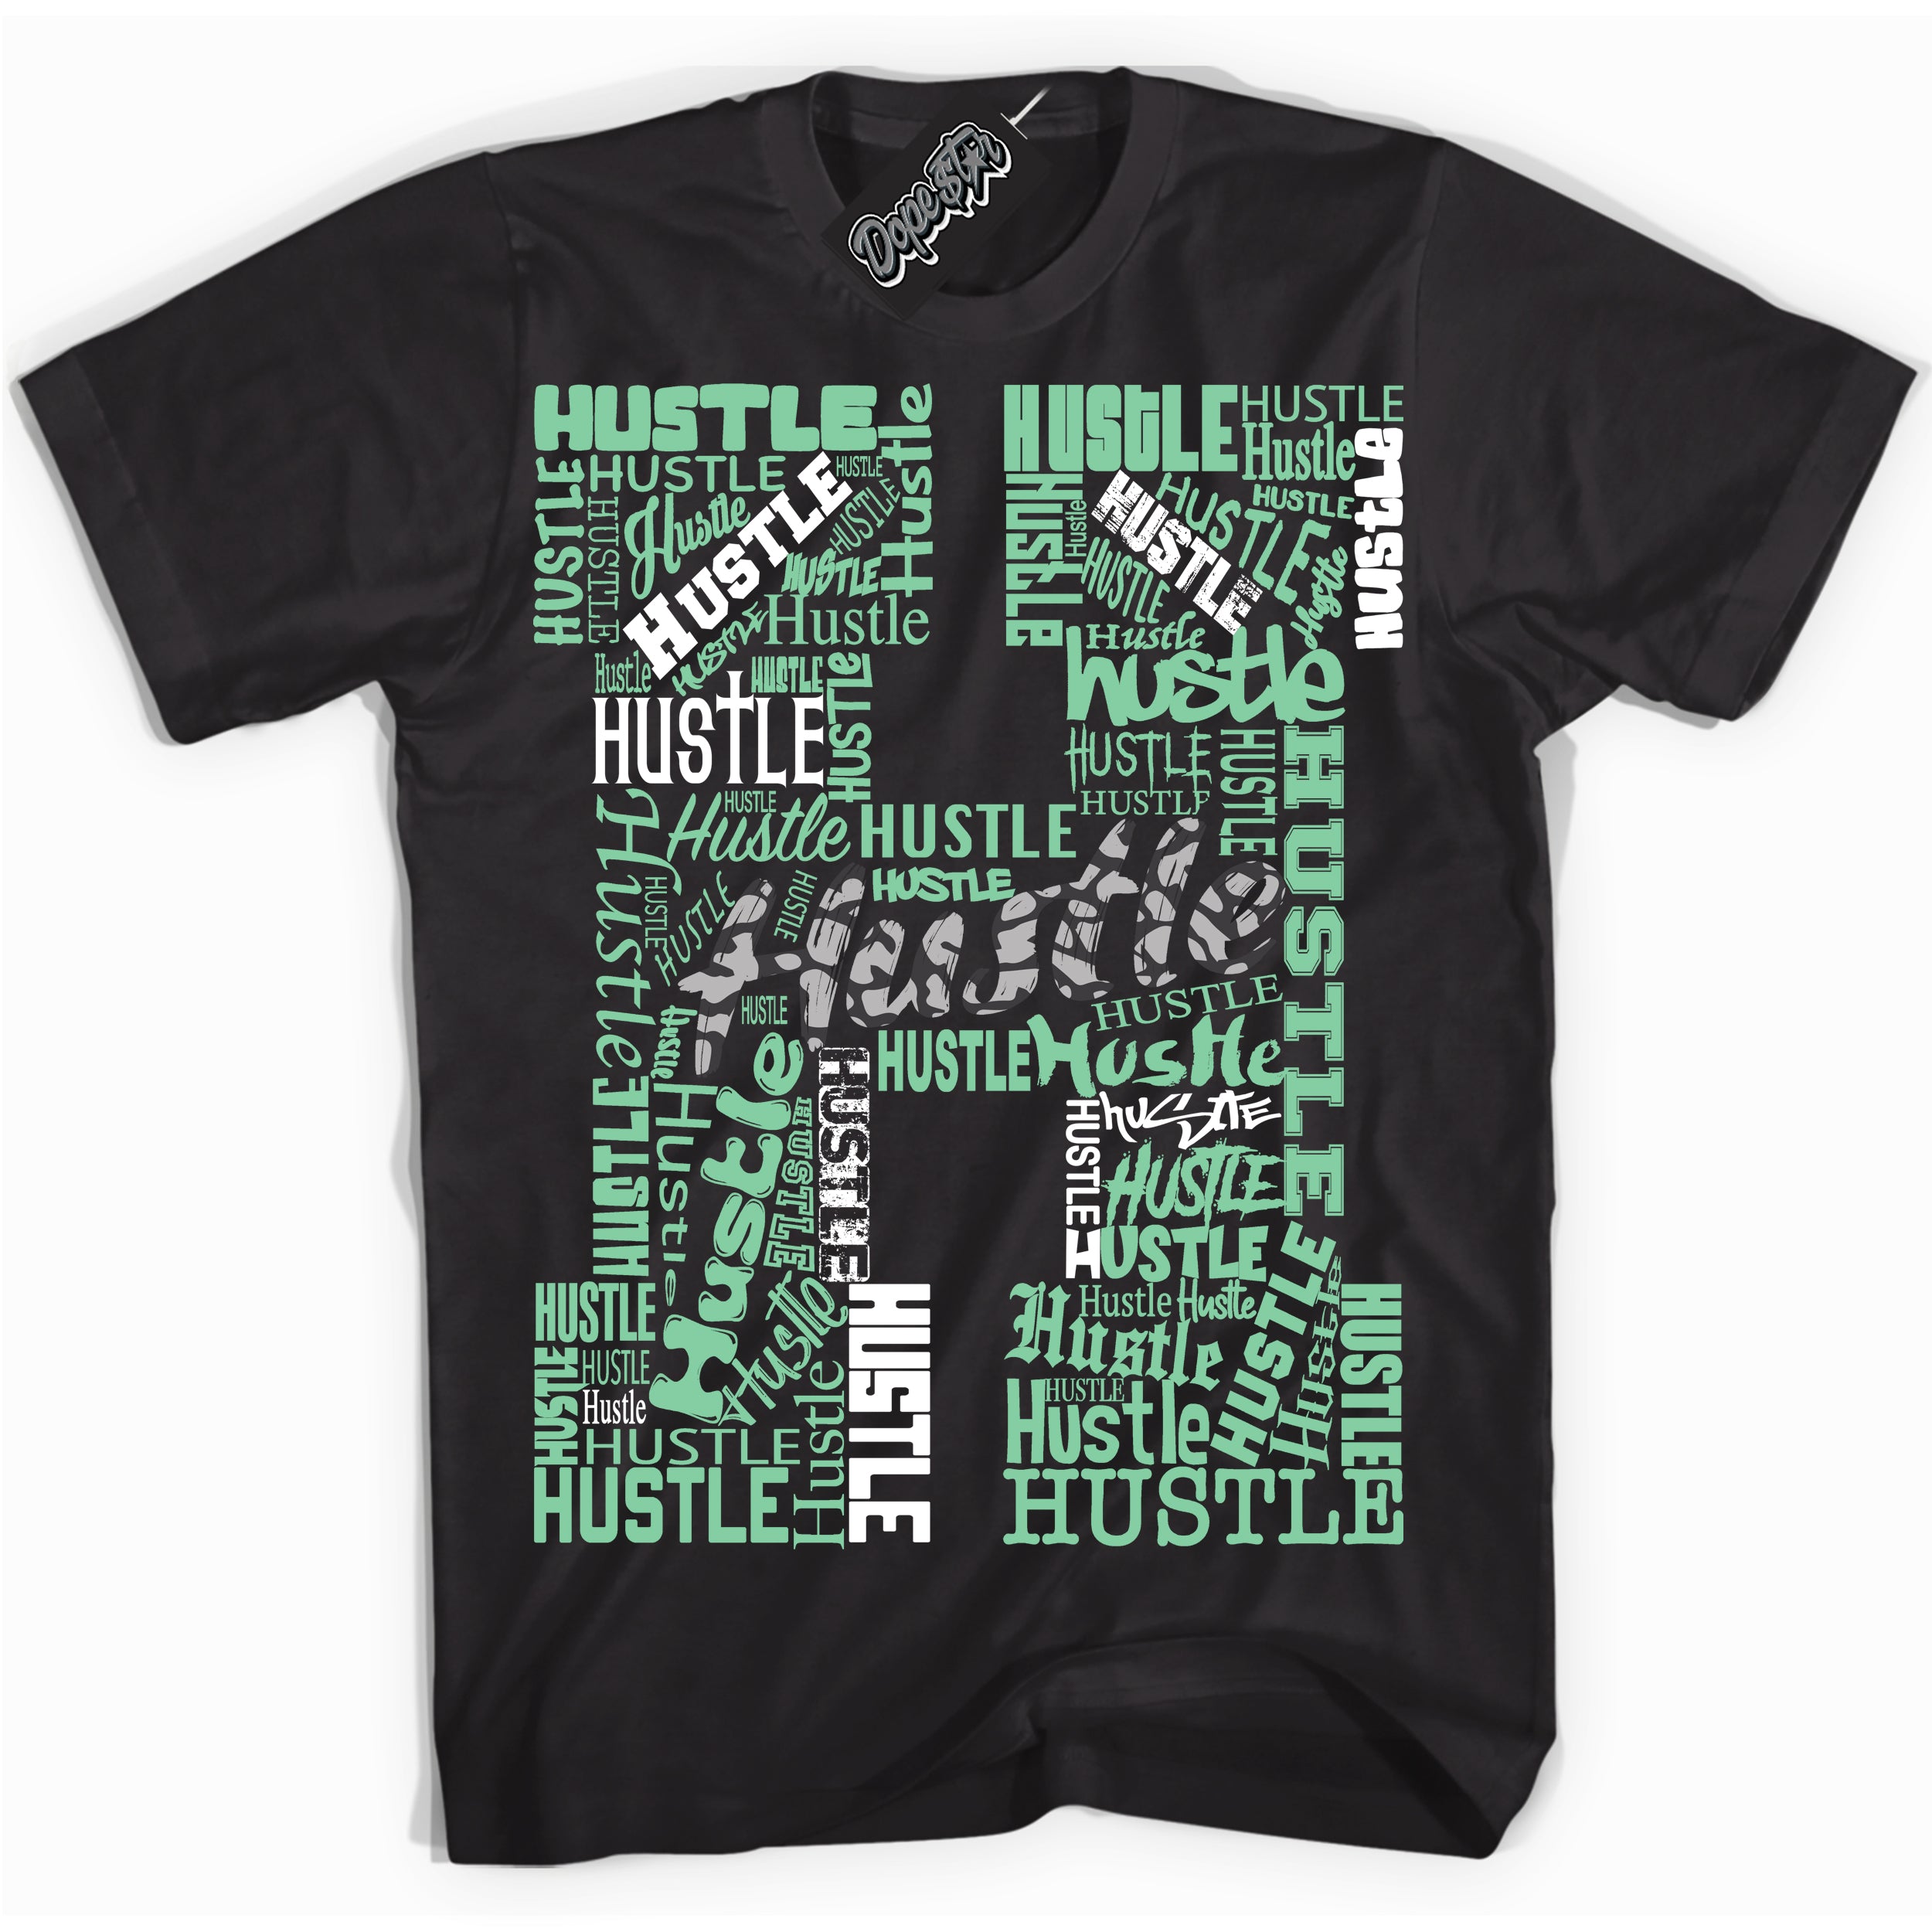 Cool Black graphic tee with “ Hustle ” design, that perfectly matches Green Glow 3s sneakers 